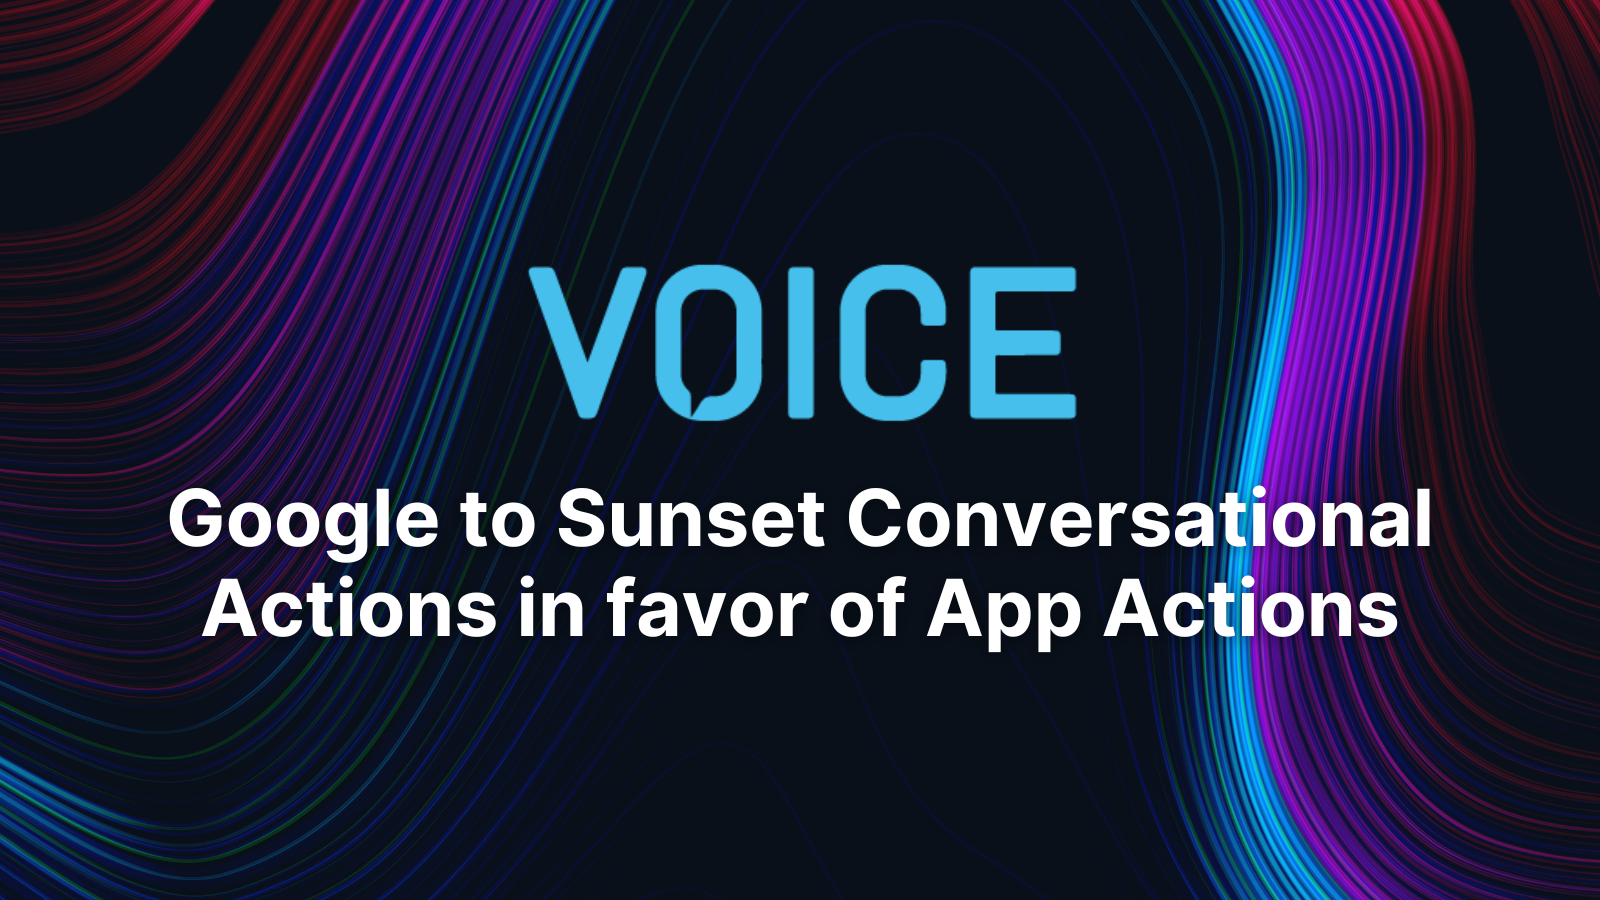 Google to Sunset Conversational Actions in favor of App Actions